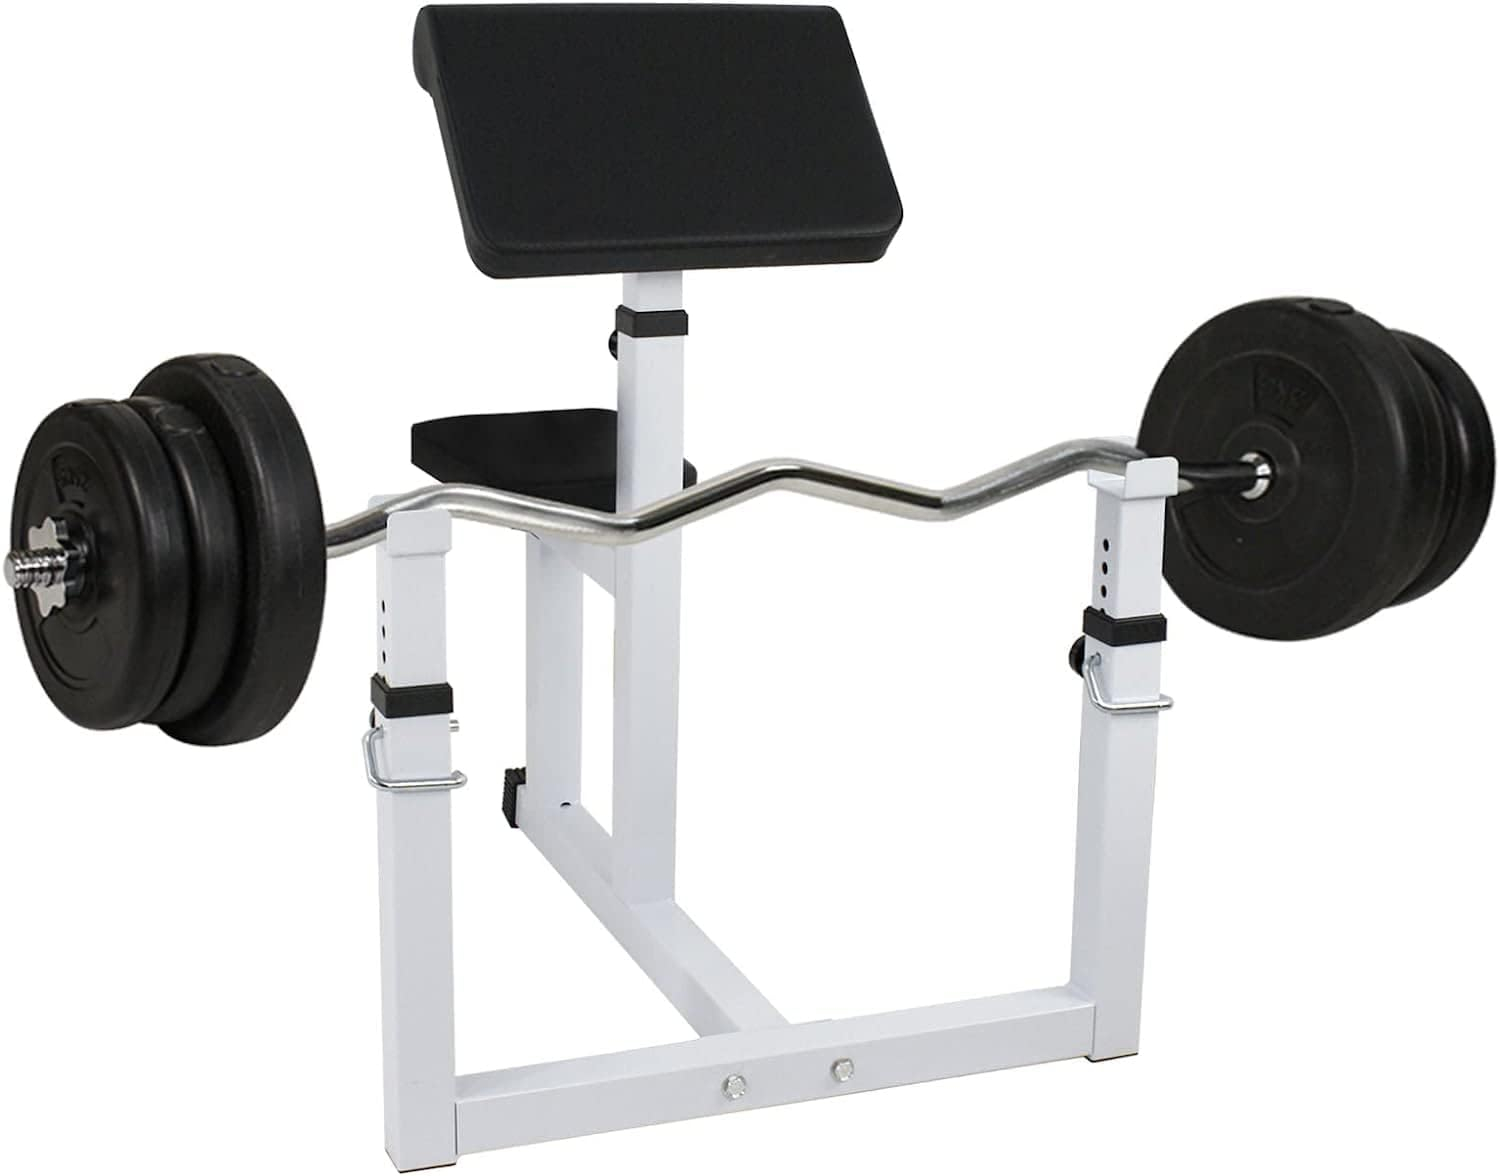 BBBuy Adjustable Arm Preacher Curl Bench Bicep Strengh Bench Seated Strenghthen Training Isolated Barbell Dumbell Biceps Station for Home Gym